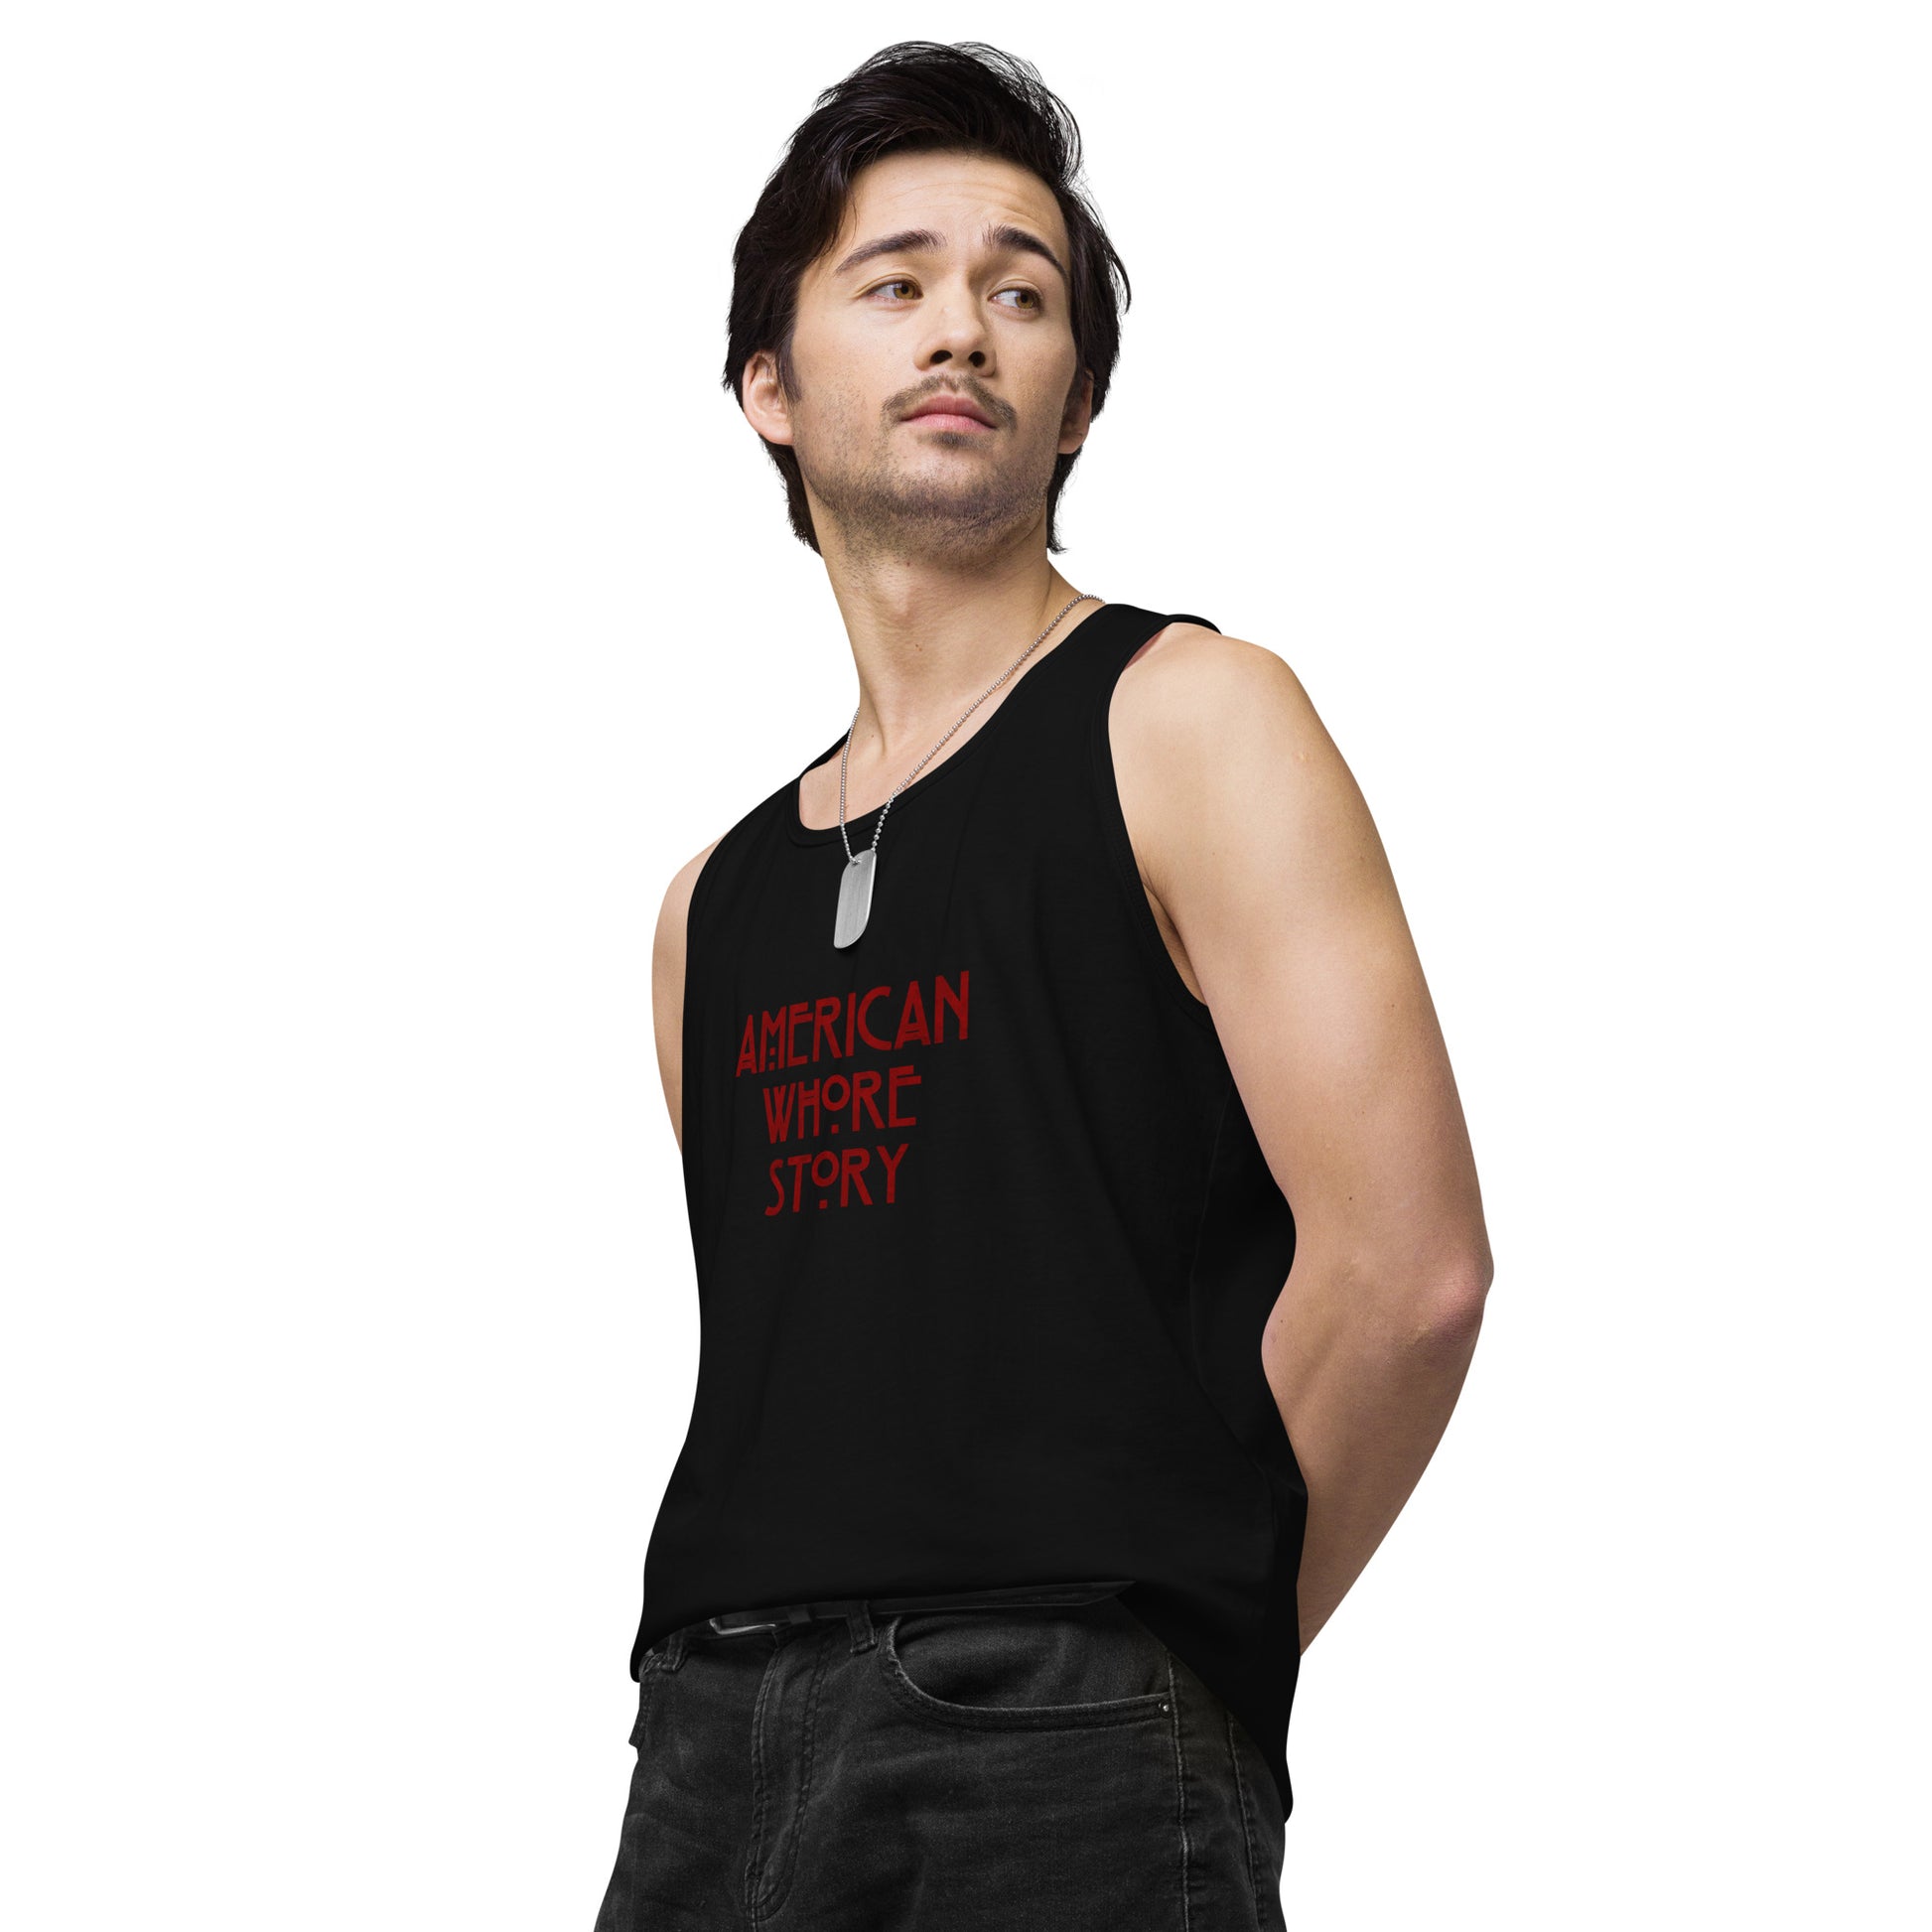 Discover the edgy 'American Whore Story' distressed red lettering unisex premium tank top from Moody Booty Apparel. Unleash your irreverent side with this LGBTQ-themed graphic shirt. Stand out and show your gay pride with this bold and fashionable piece.